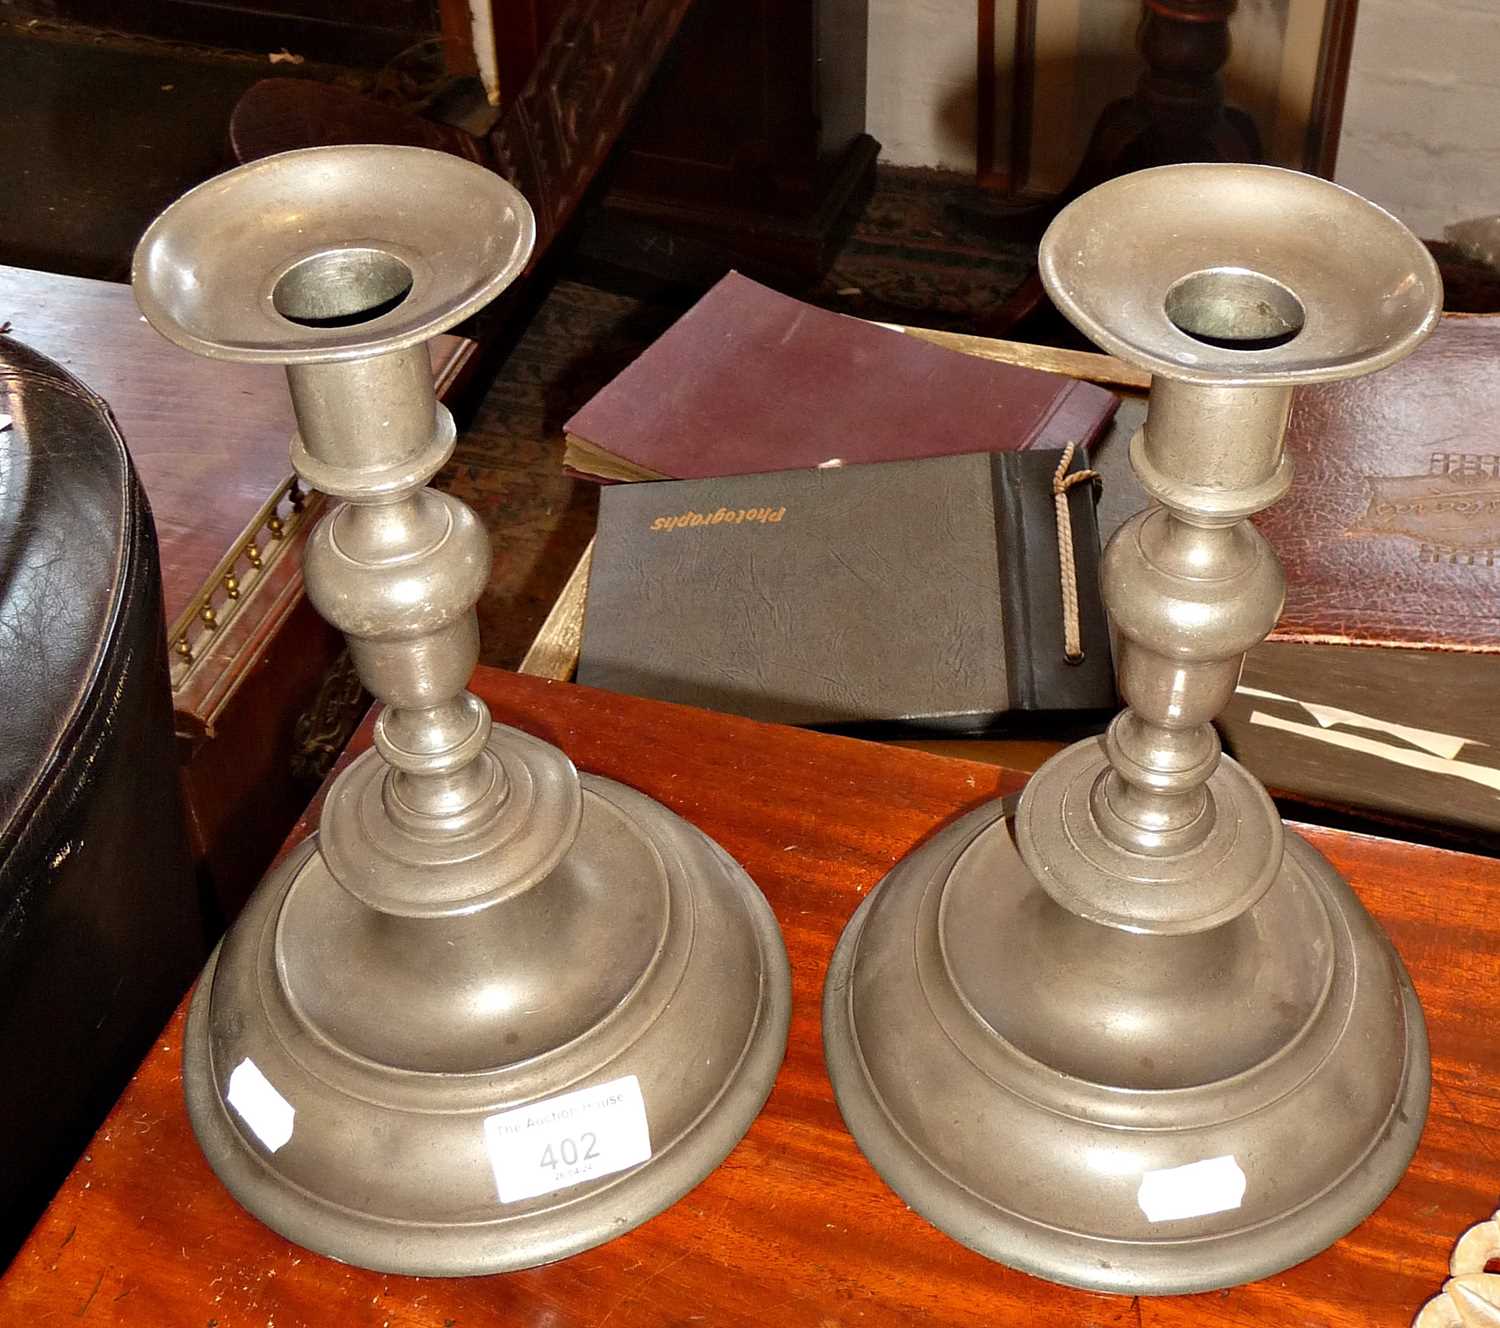 Pair of 18th c. pewter candlesticks with Bristol touchmarks, approx. 24cm high